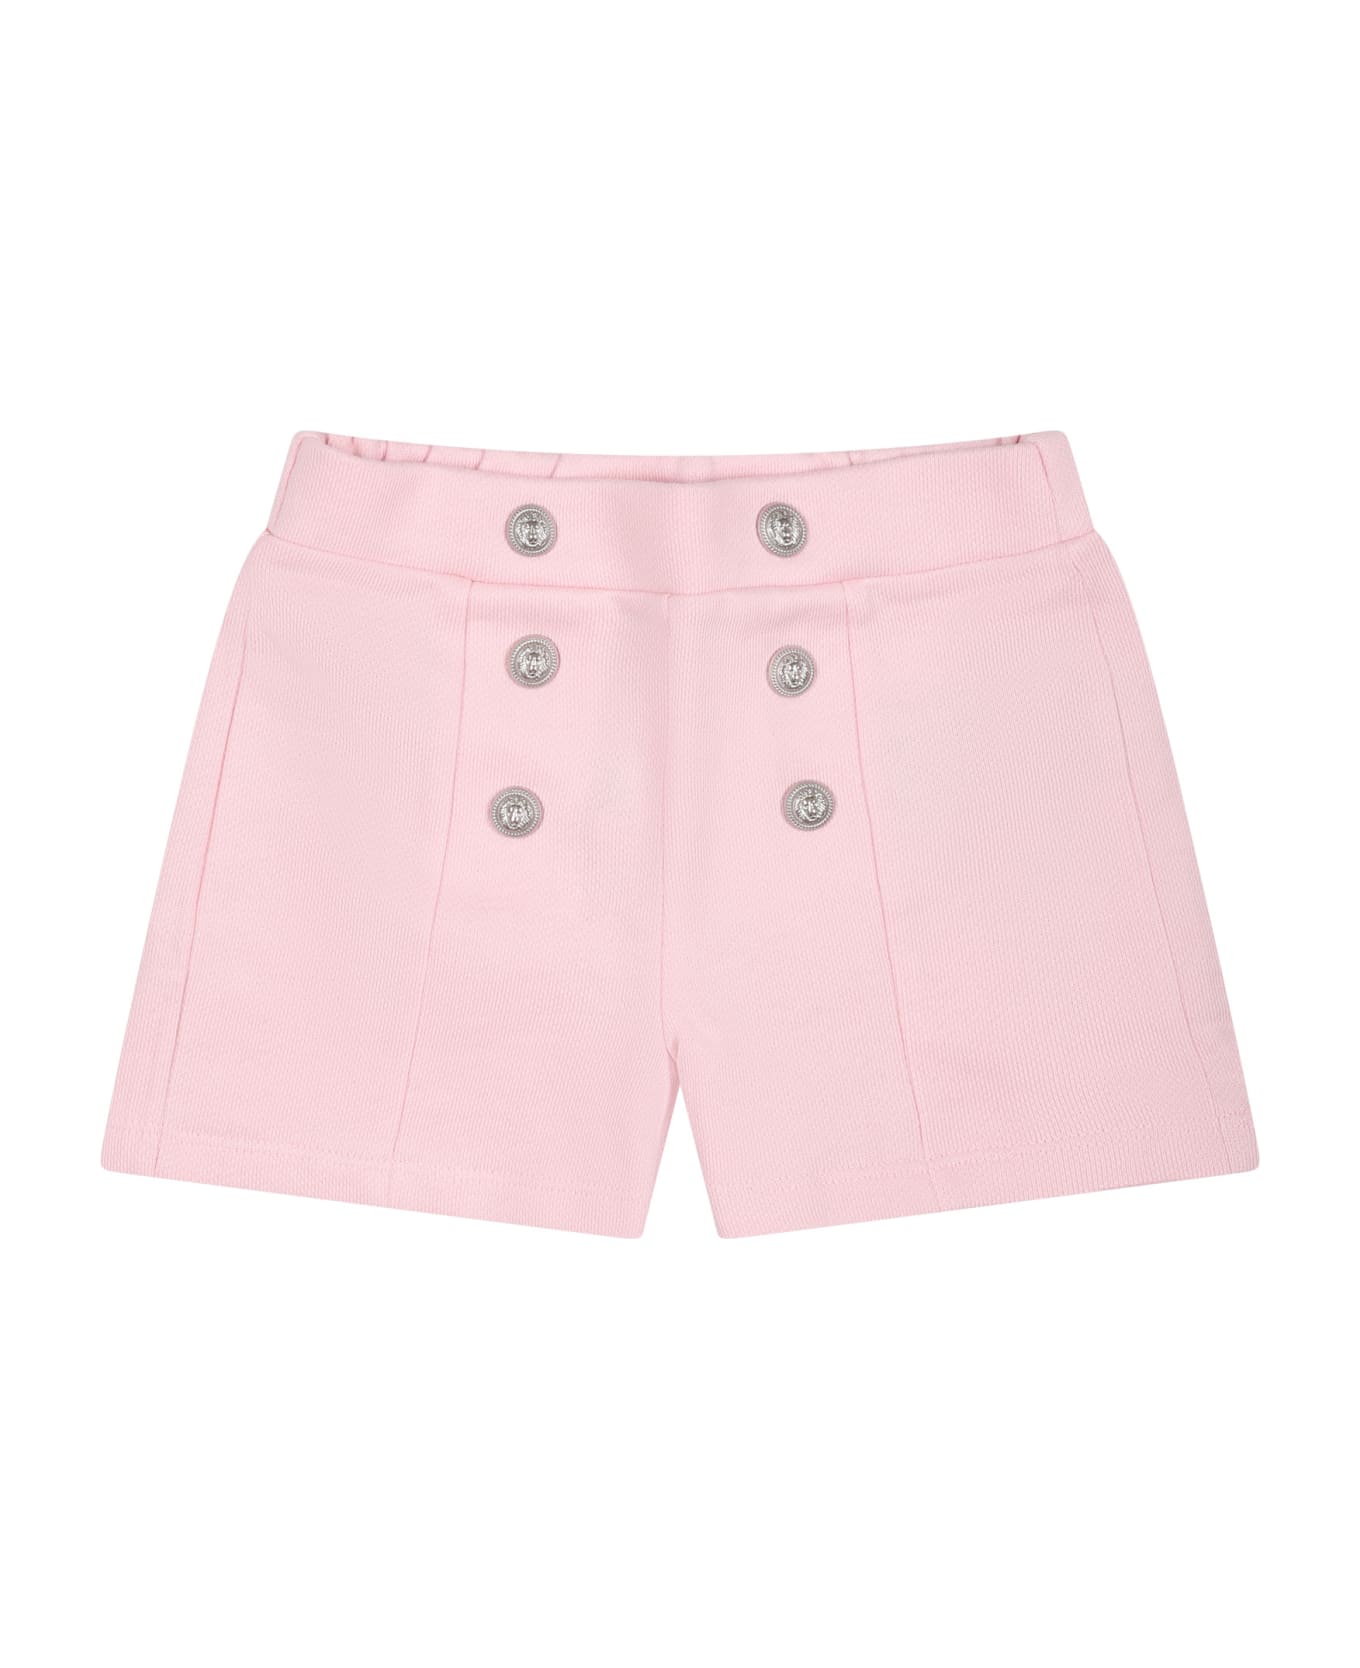 Balmain Pink Shorts For Baby Girl With Silver Buttons - Pink